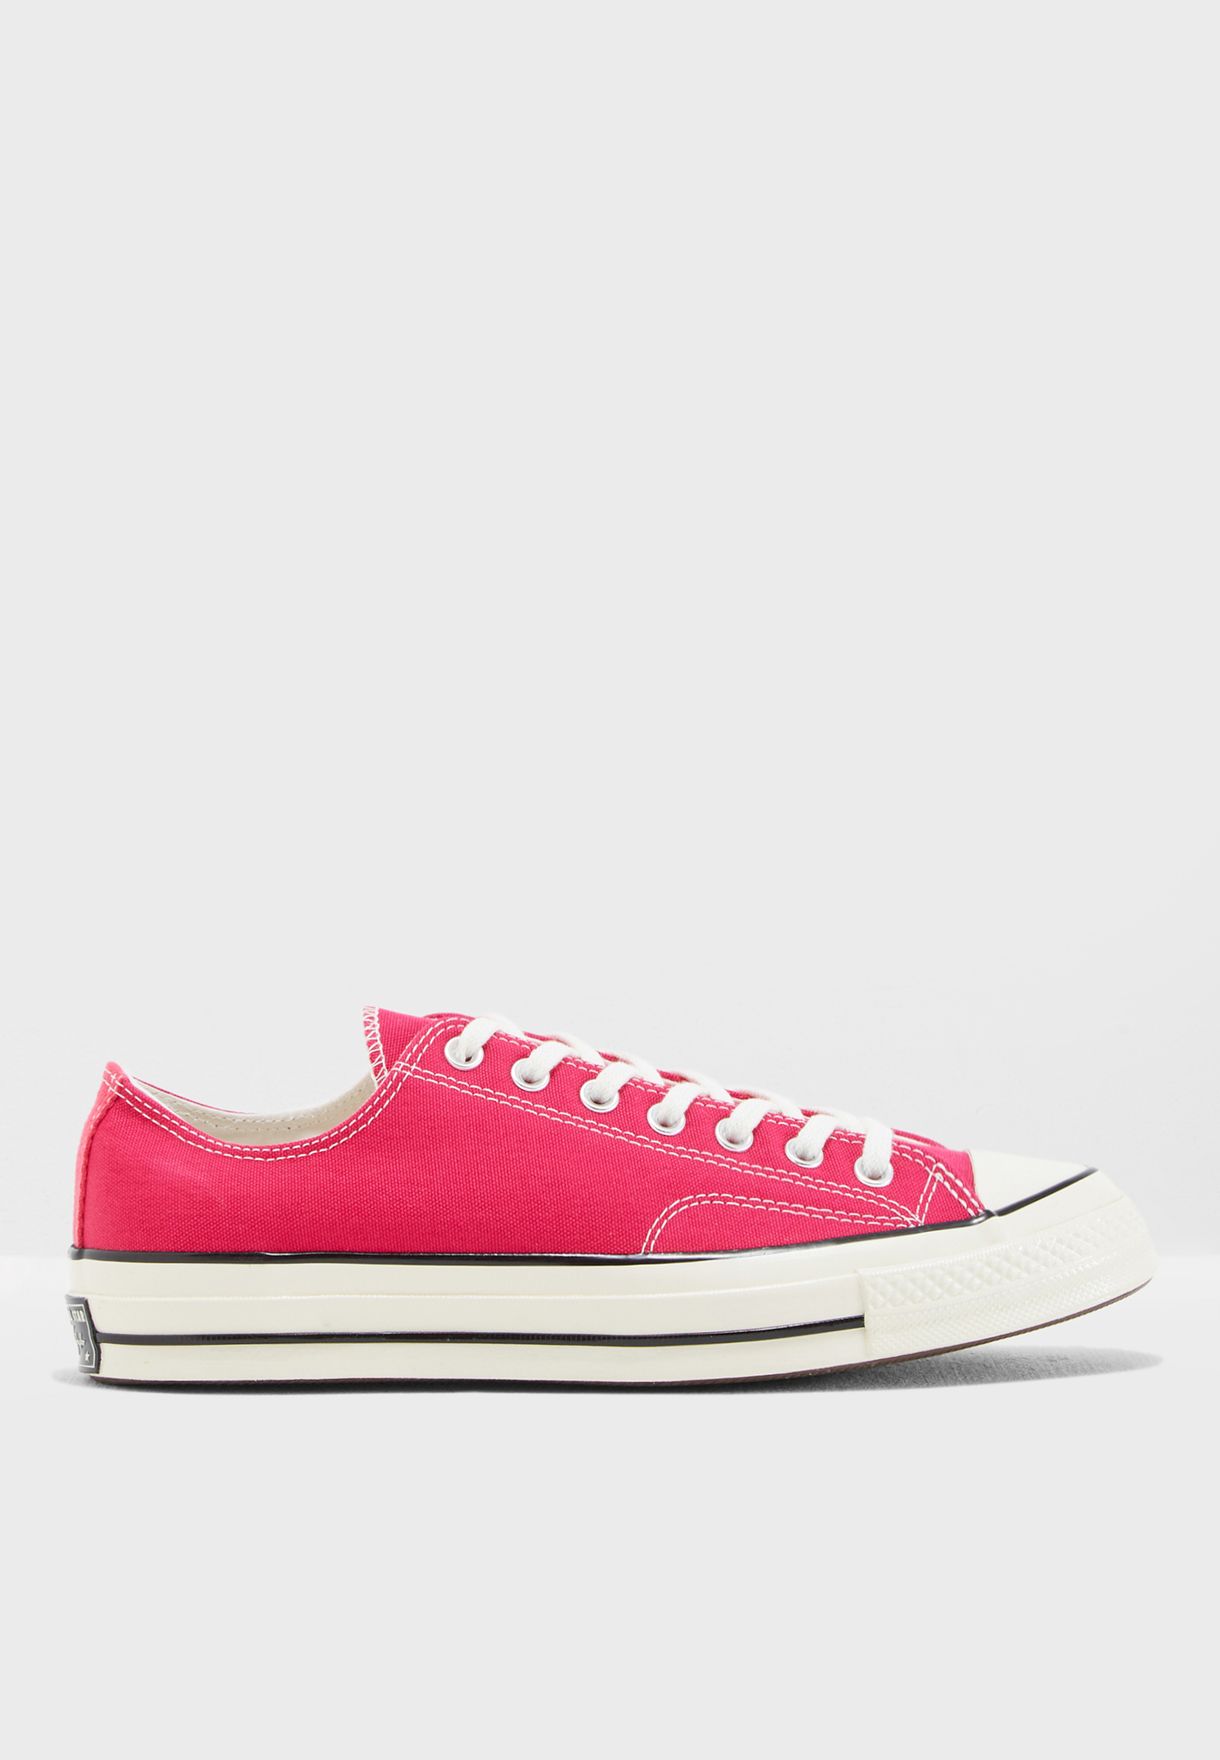 Buy Converse pink Chuck Taylor All Star 1970s for Men in Doha, other cities